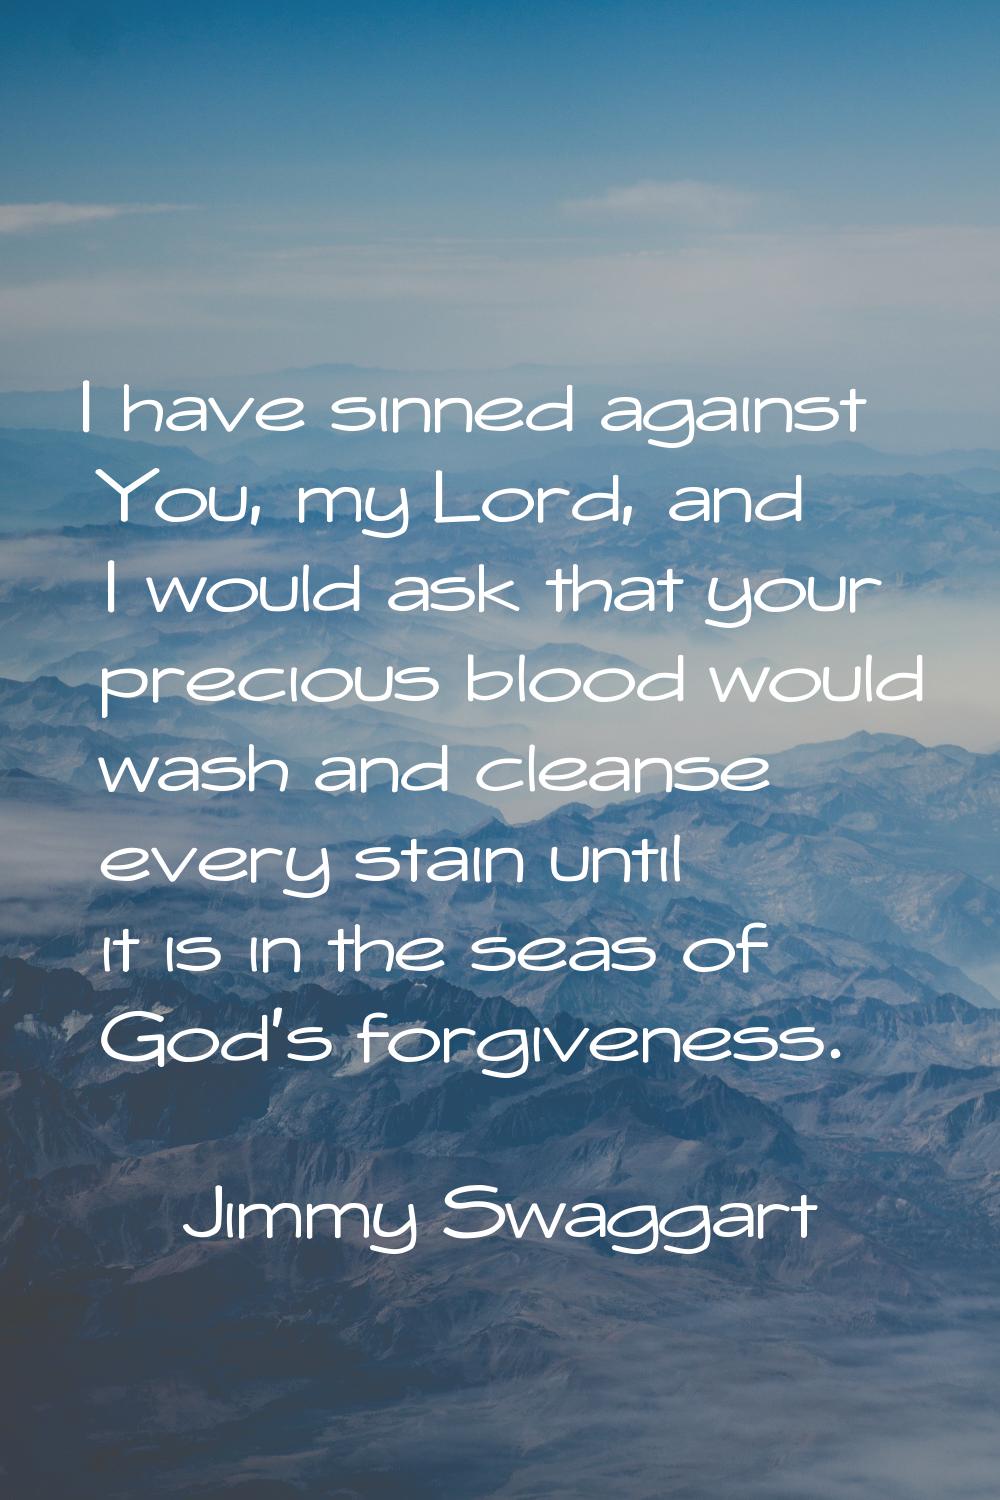 I have sinned against You, my Lord, and I would ask that your precious blood would wash and cleanse